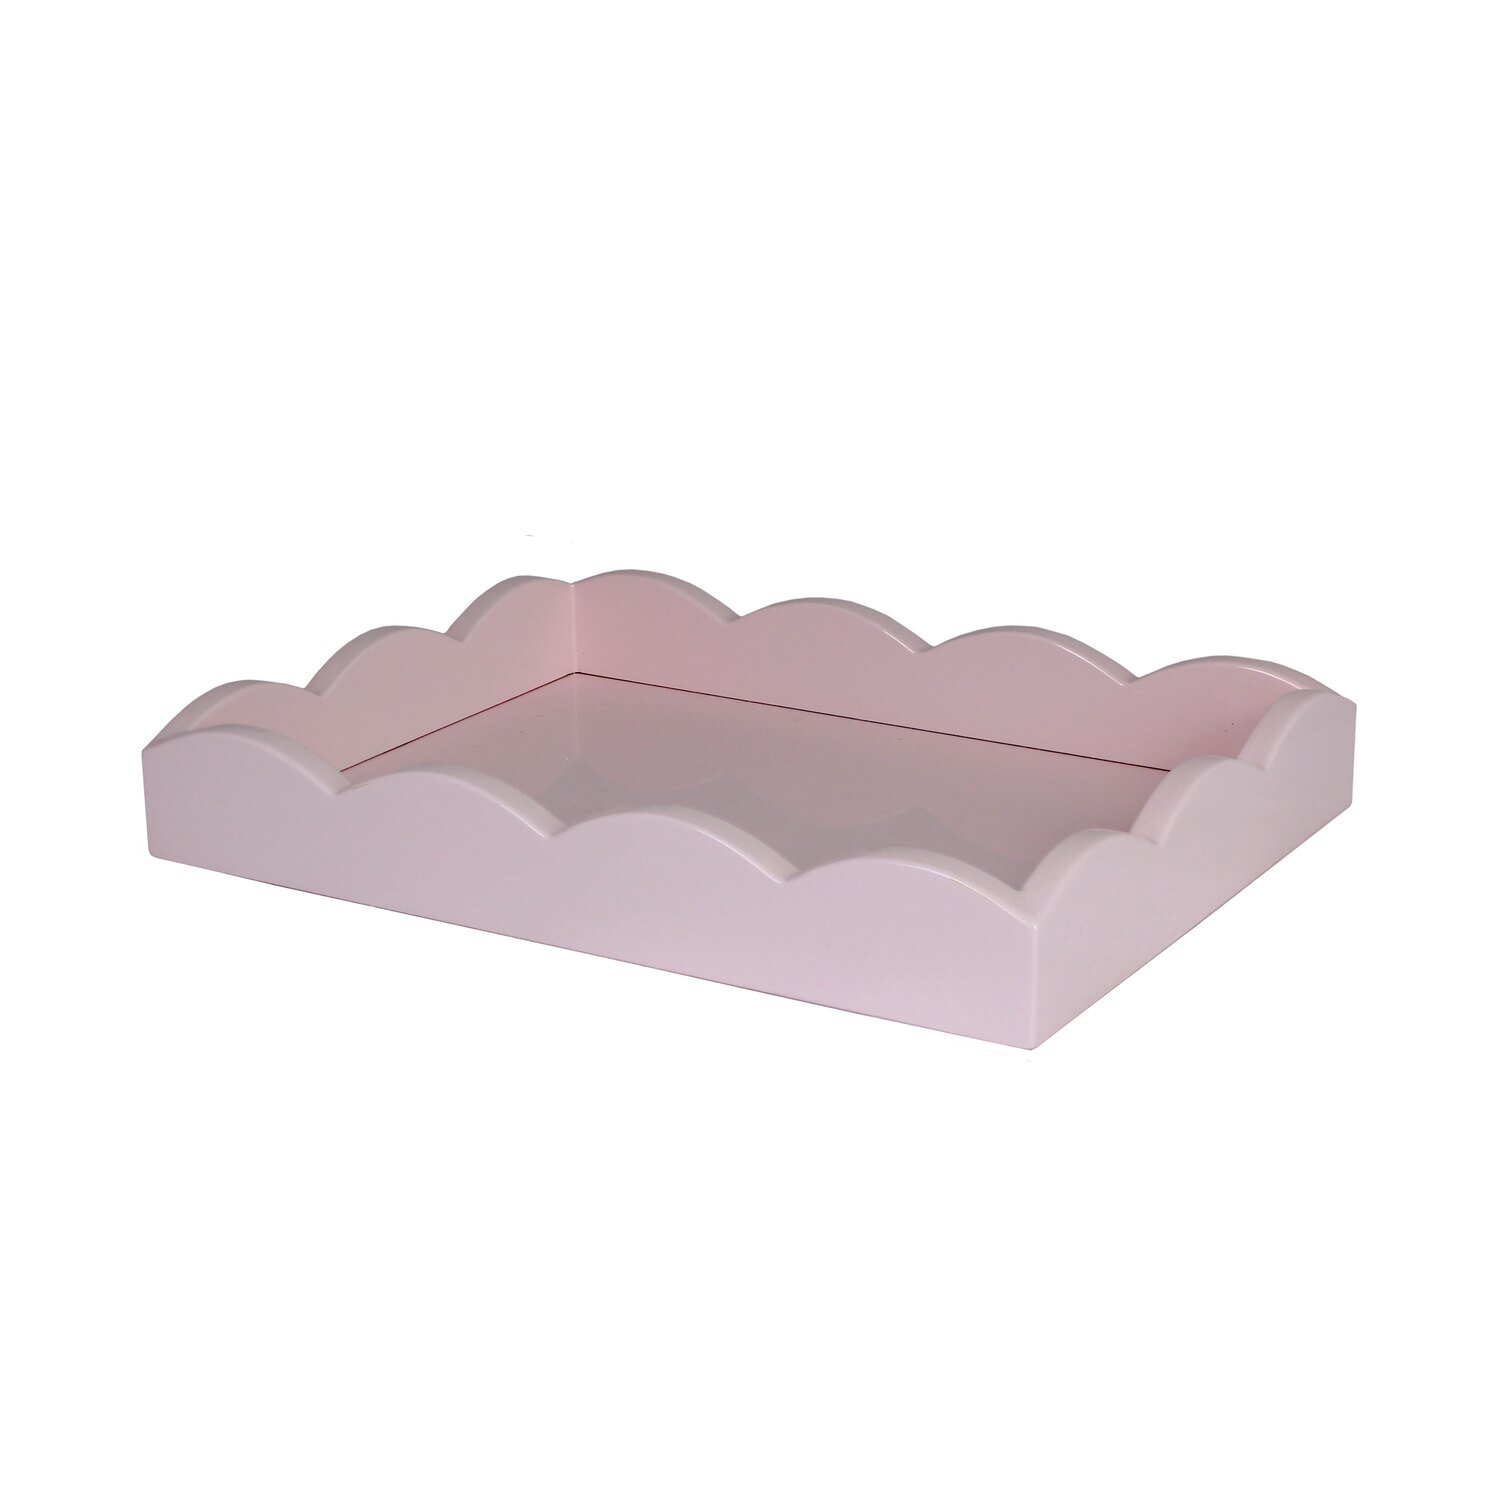 Addison Ross Small Pale Pink Scalloped Edge Tray 11 x 8 Inch Lacquer TR6205